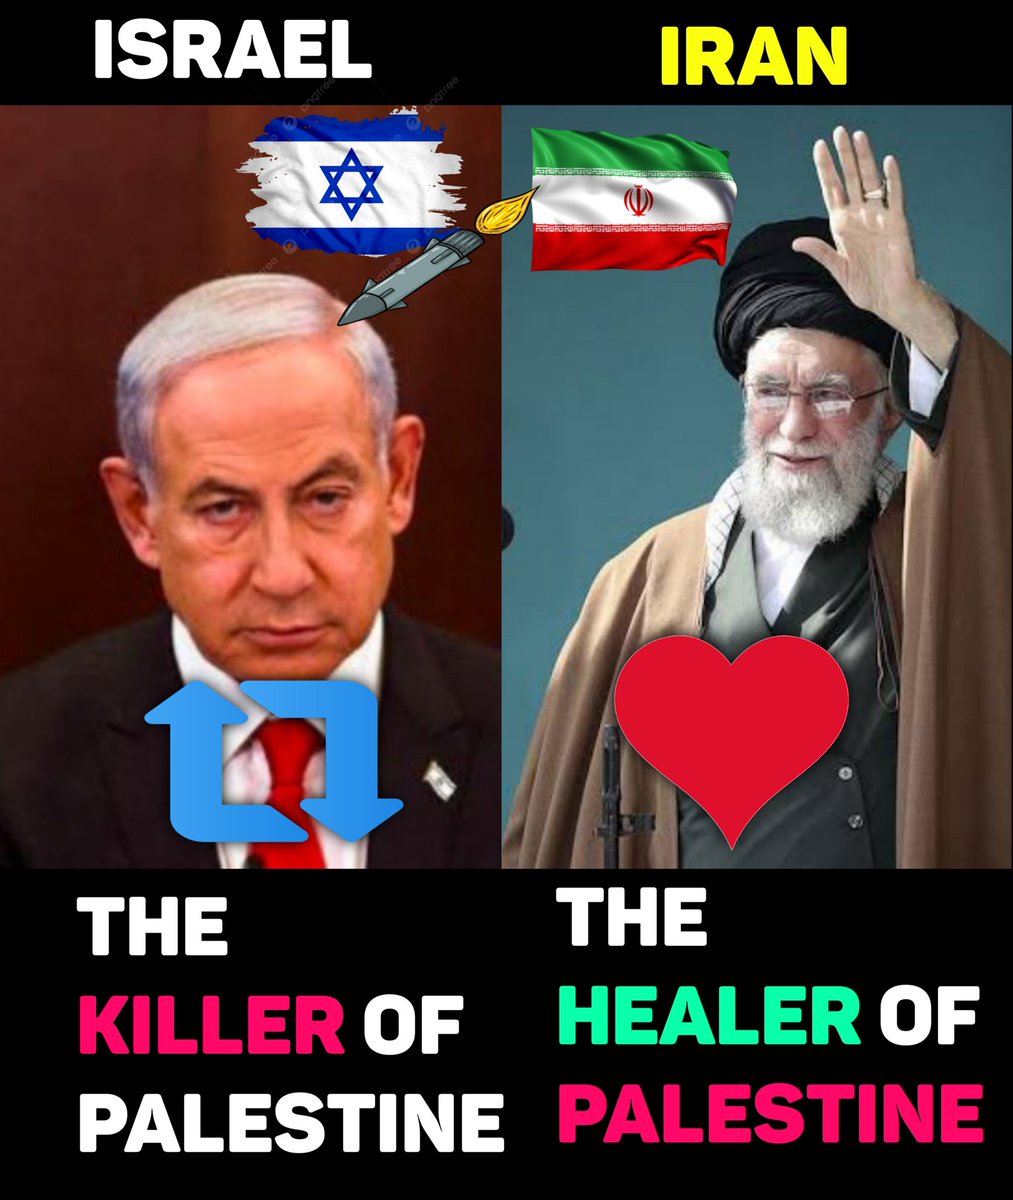 IF YOU SUPPORT IRAN 🇮🇷 THEN LIKE THIS POST

IF YOU SUPPORT ISRAEL 🇮🇱THEN REPOST THIS POST 

#WorldWar3 #IranAttackIsrael
#IsraeliTerrorists 
#israel #Iran